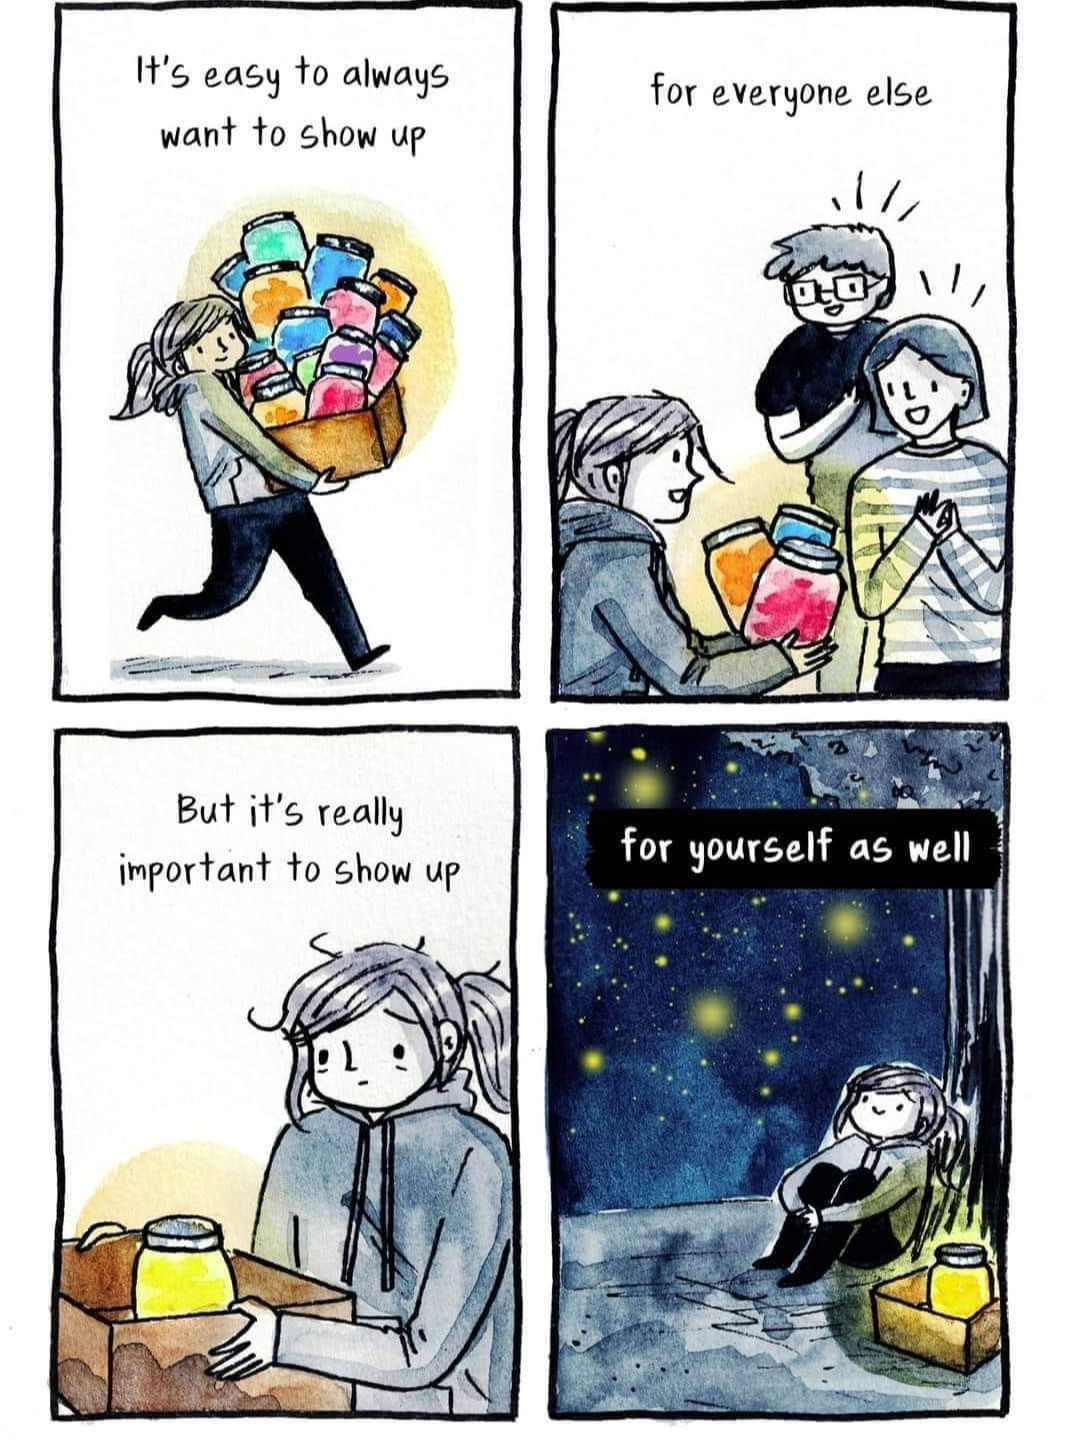 Let's practice self love!

I am a psychologist working for the last 6 years.  

Showing up for yourself is possible when we practice self love.

if you need more assistance on this, I'm here to help you :)

# # # 